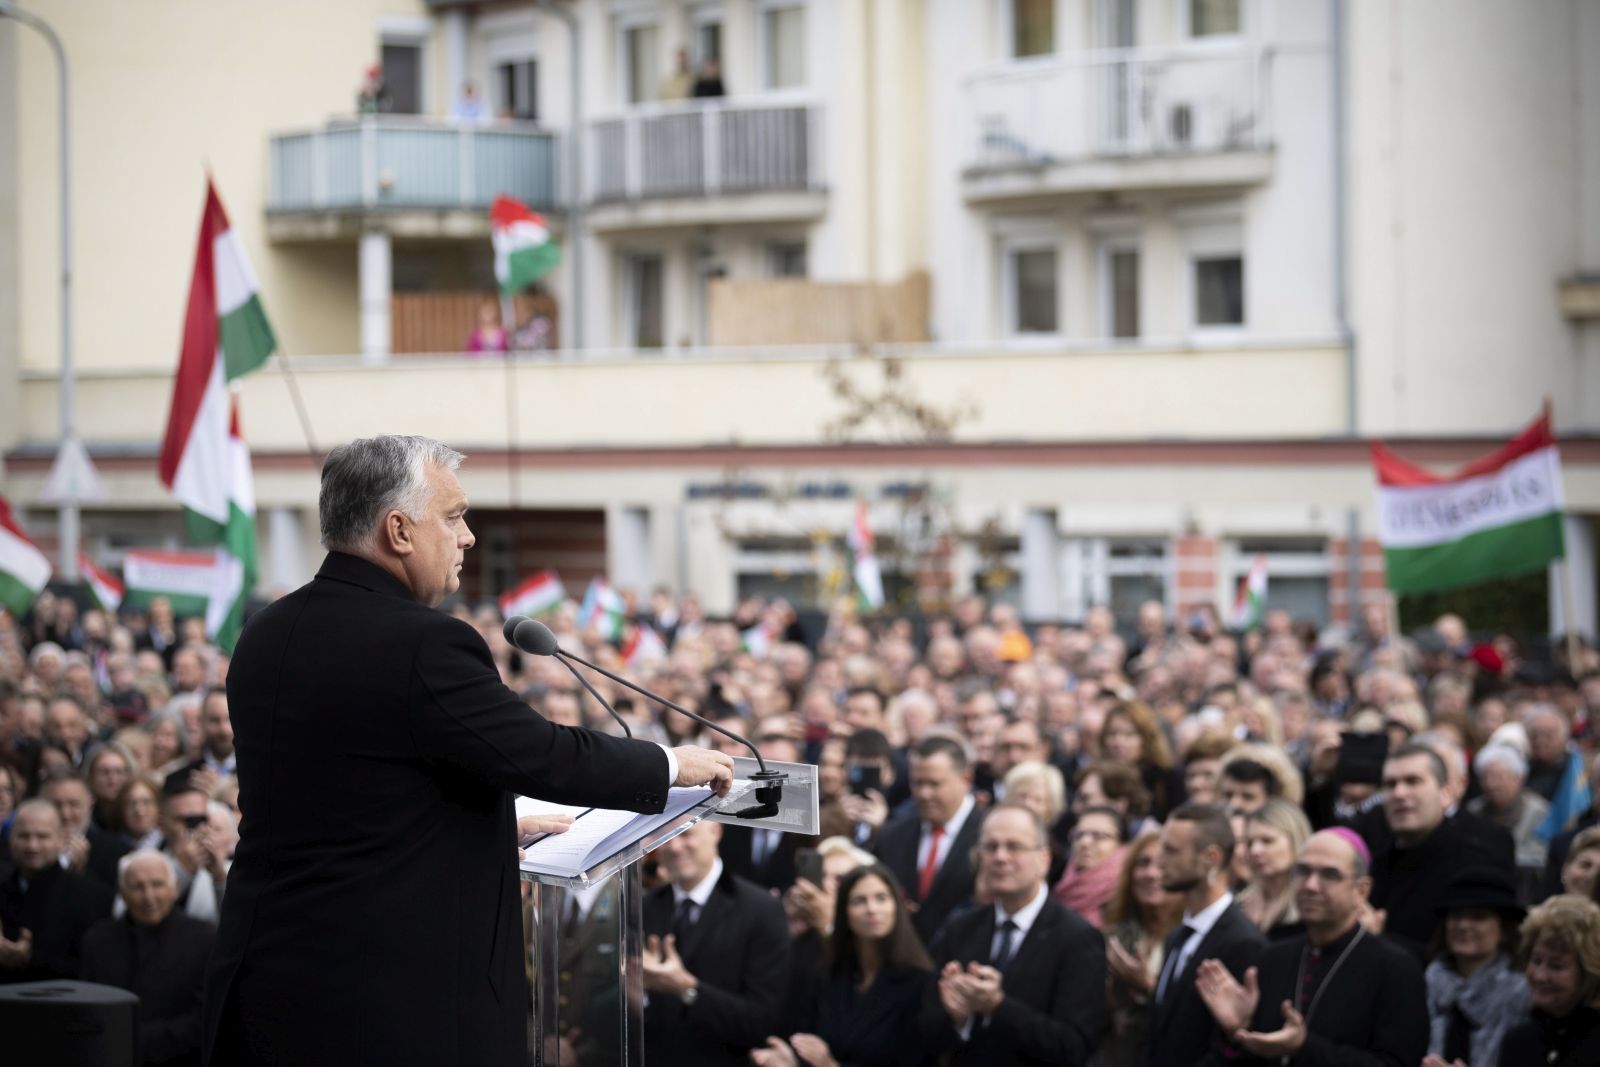 epa10260575 A handout photo made available by the Hungarian Prime Minister's Press Office shows Hungarian Prime Minister Viktor Orban delivering his address to mark the 66th anniversary of the outbreak of the Hungarian revolution and war of independence against communist rule and the Soviet Union in 1956 in Zalaegerszeg, Hungary, 23 October 2022.  EPA/VIVIEN CHER BENKO / HUNGARIAN PRIME MINISTER'S PO / HANDOUT HUNGARY OUT HANDOUT EDITORIAL USE ONLY/NO SALES